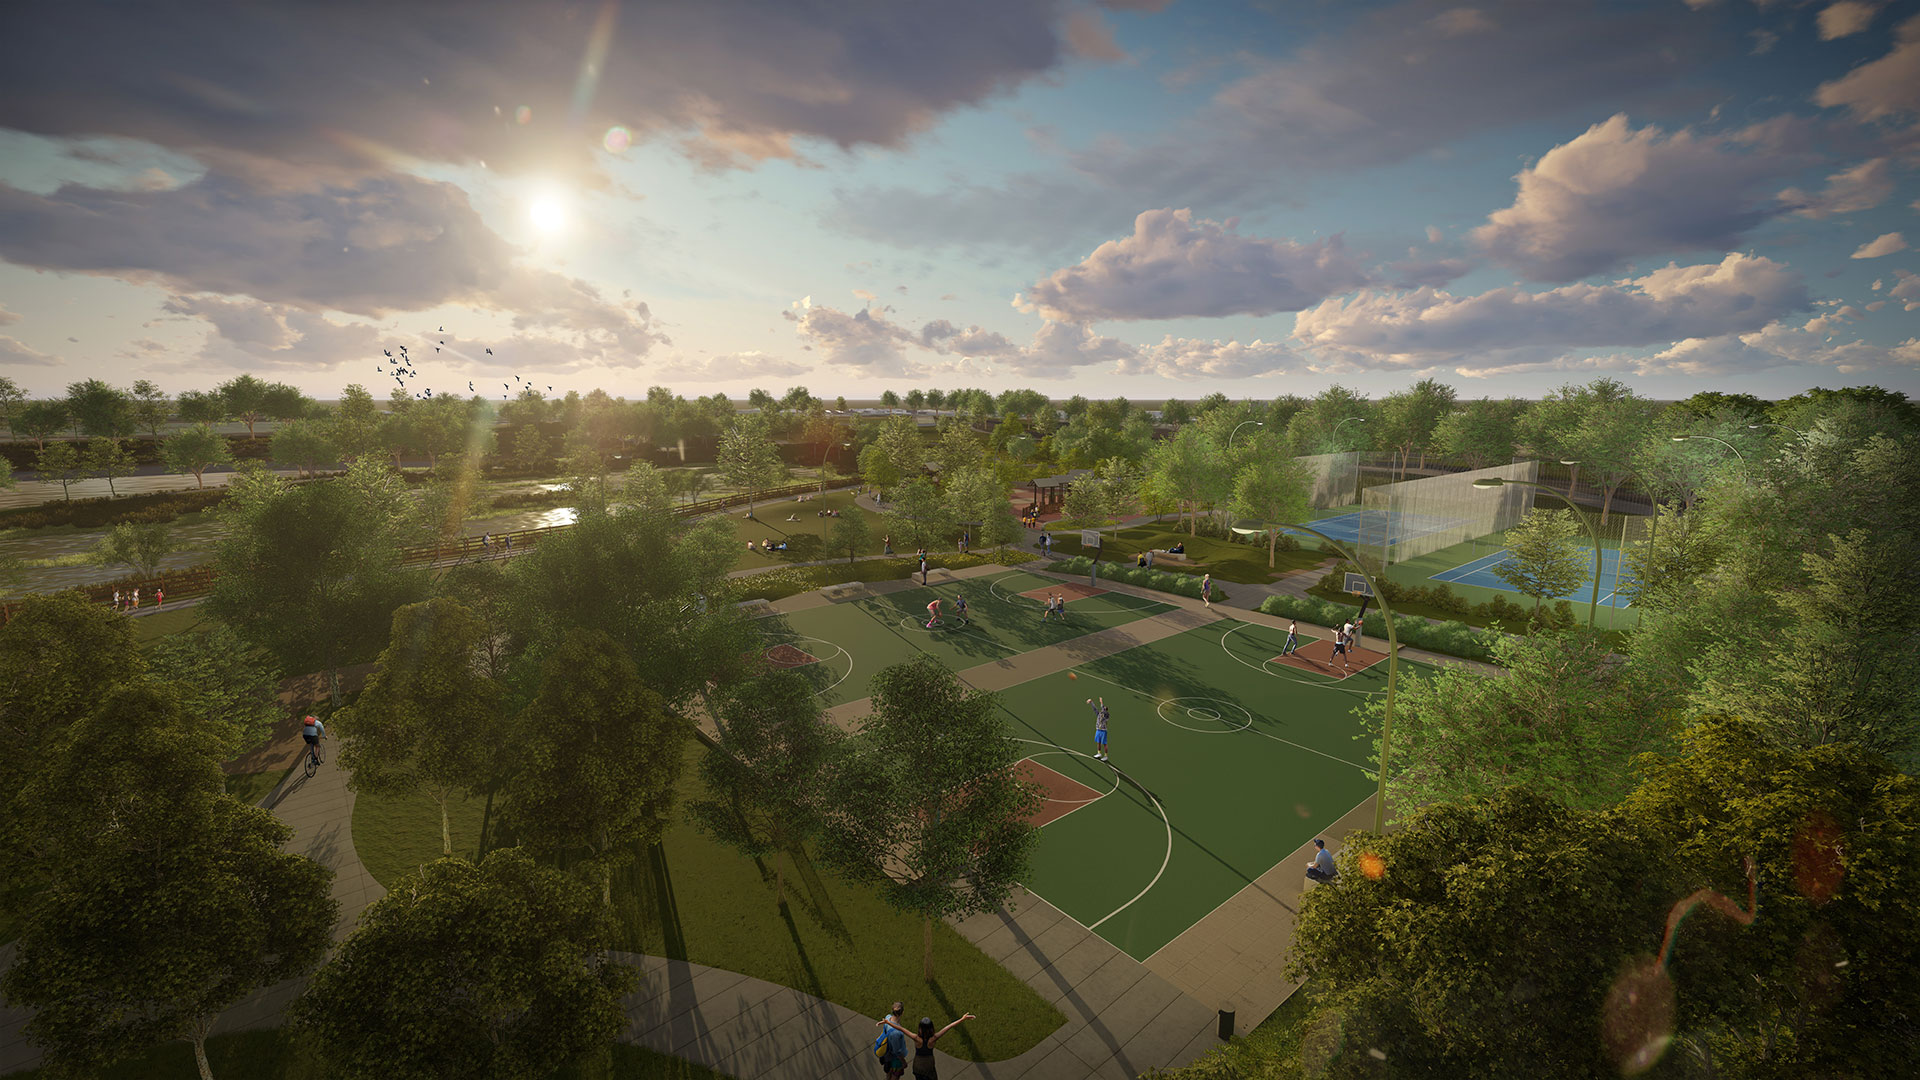 Basketball and Tennis Courts